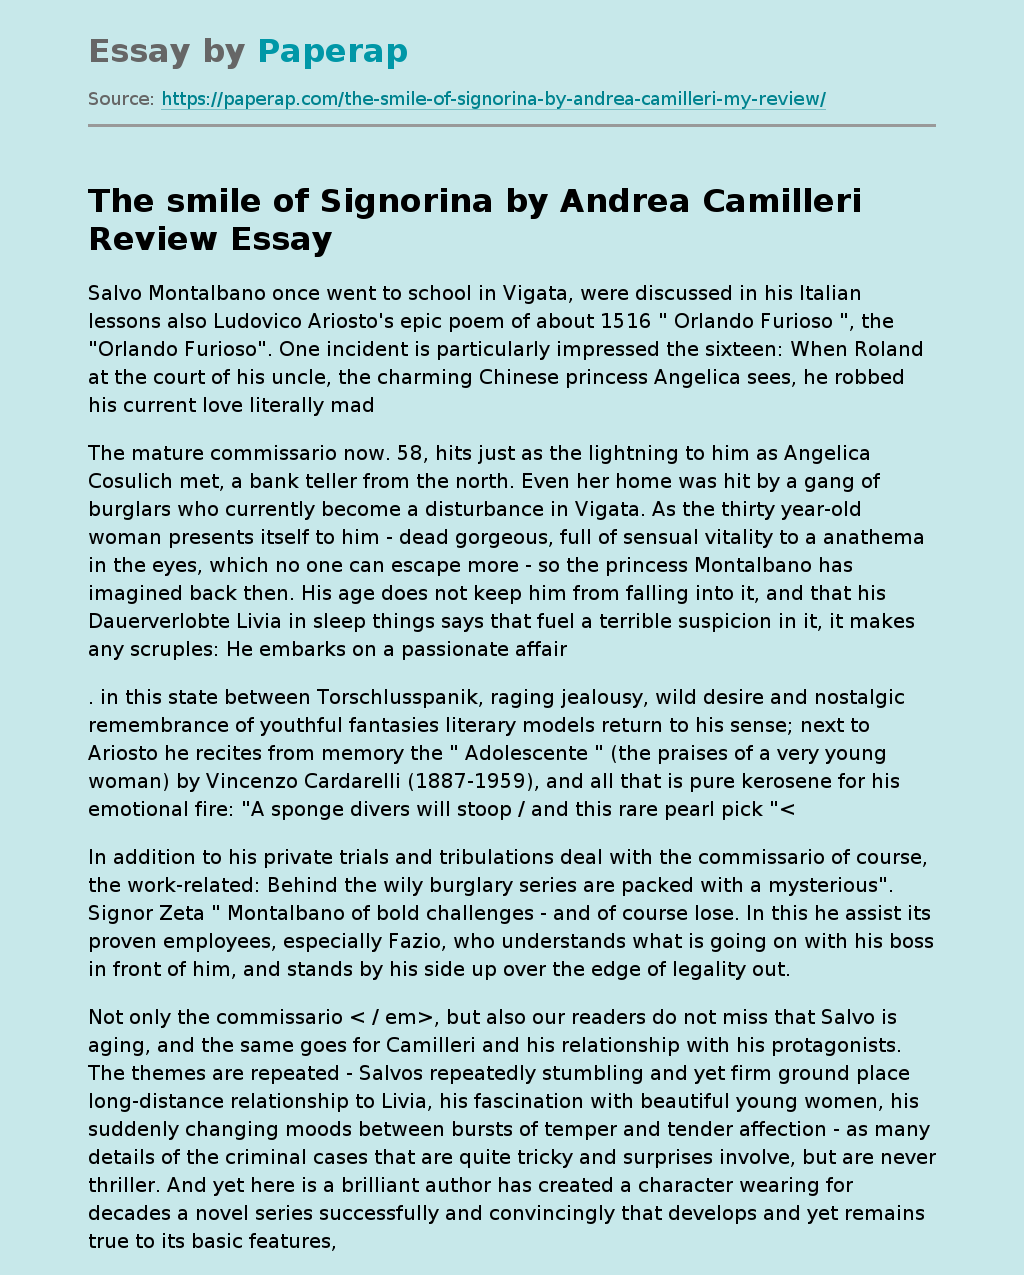 The Smile of Signorina by Andrea Camilleri Review